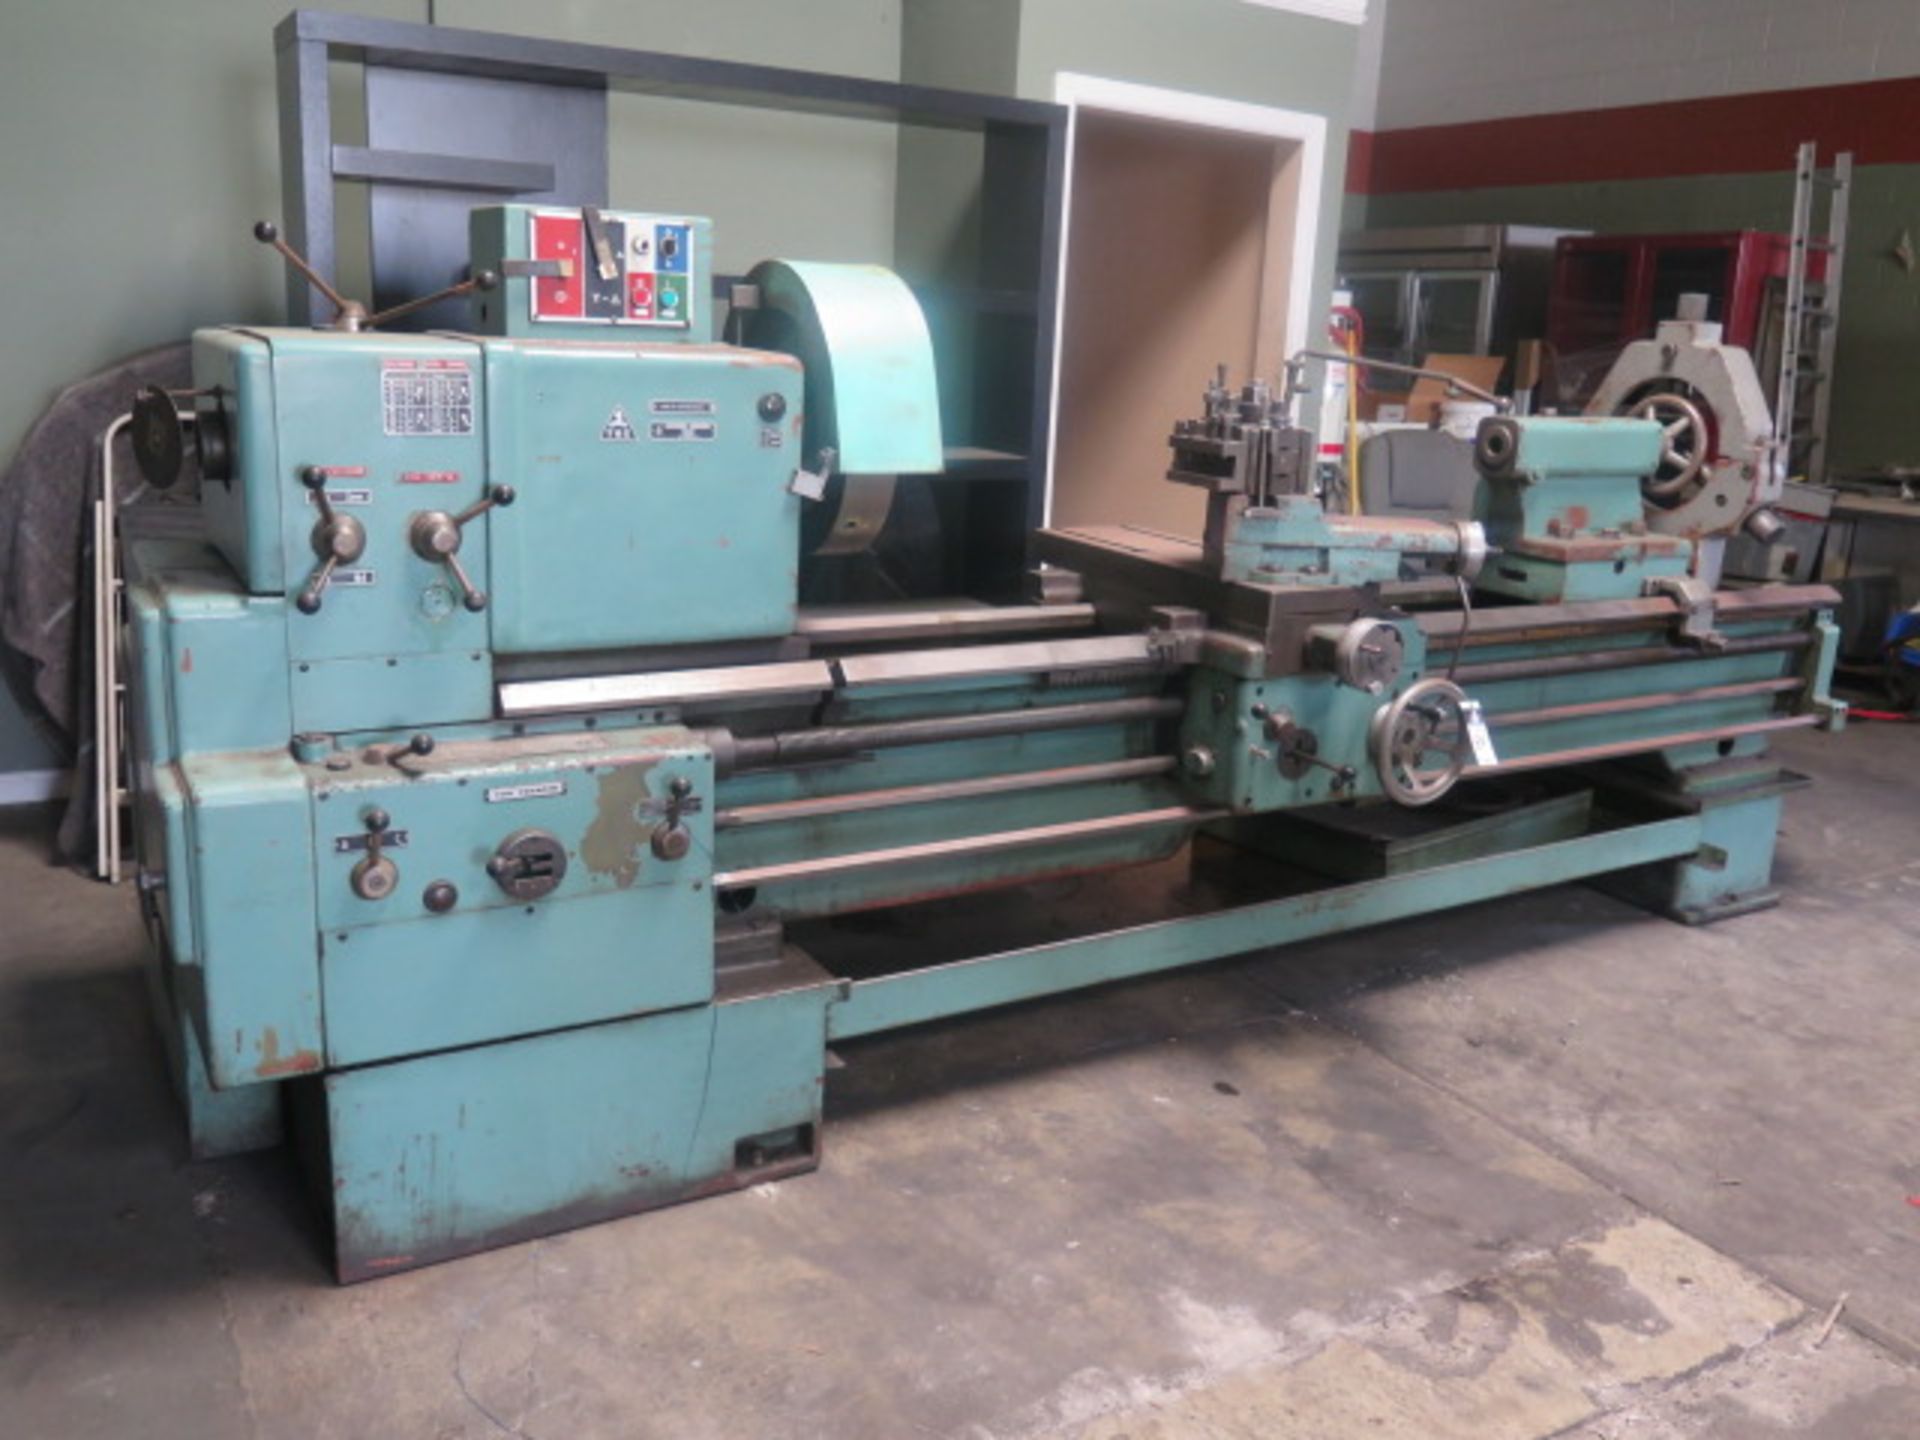 TOS Type SN71B 28” x 90” Geared Head Gap Bed Lathe s/n 071200760374 w/ 10-1000 RPM, Inch - Image 2 of 9